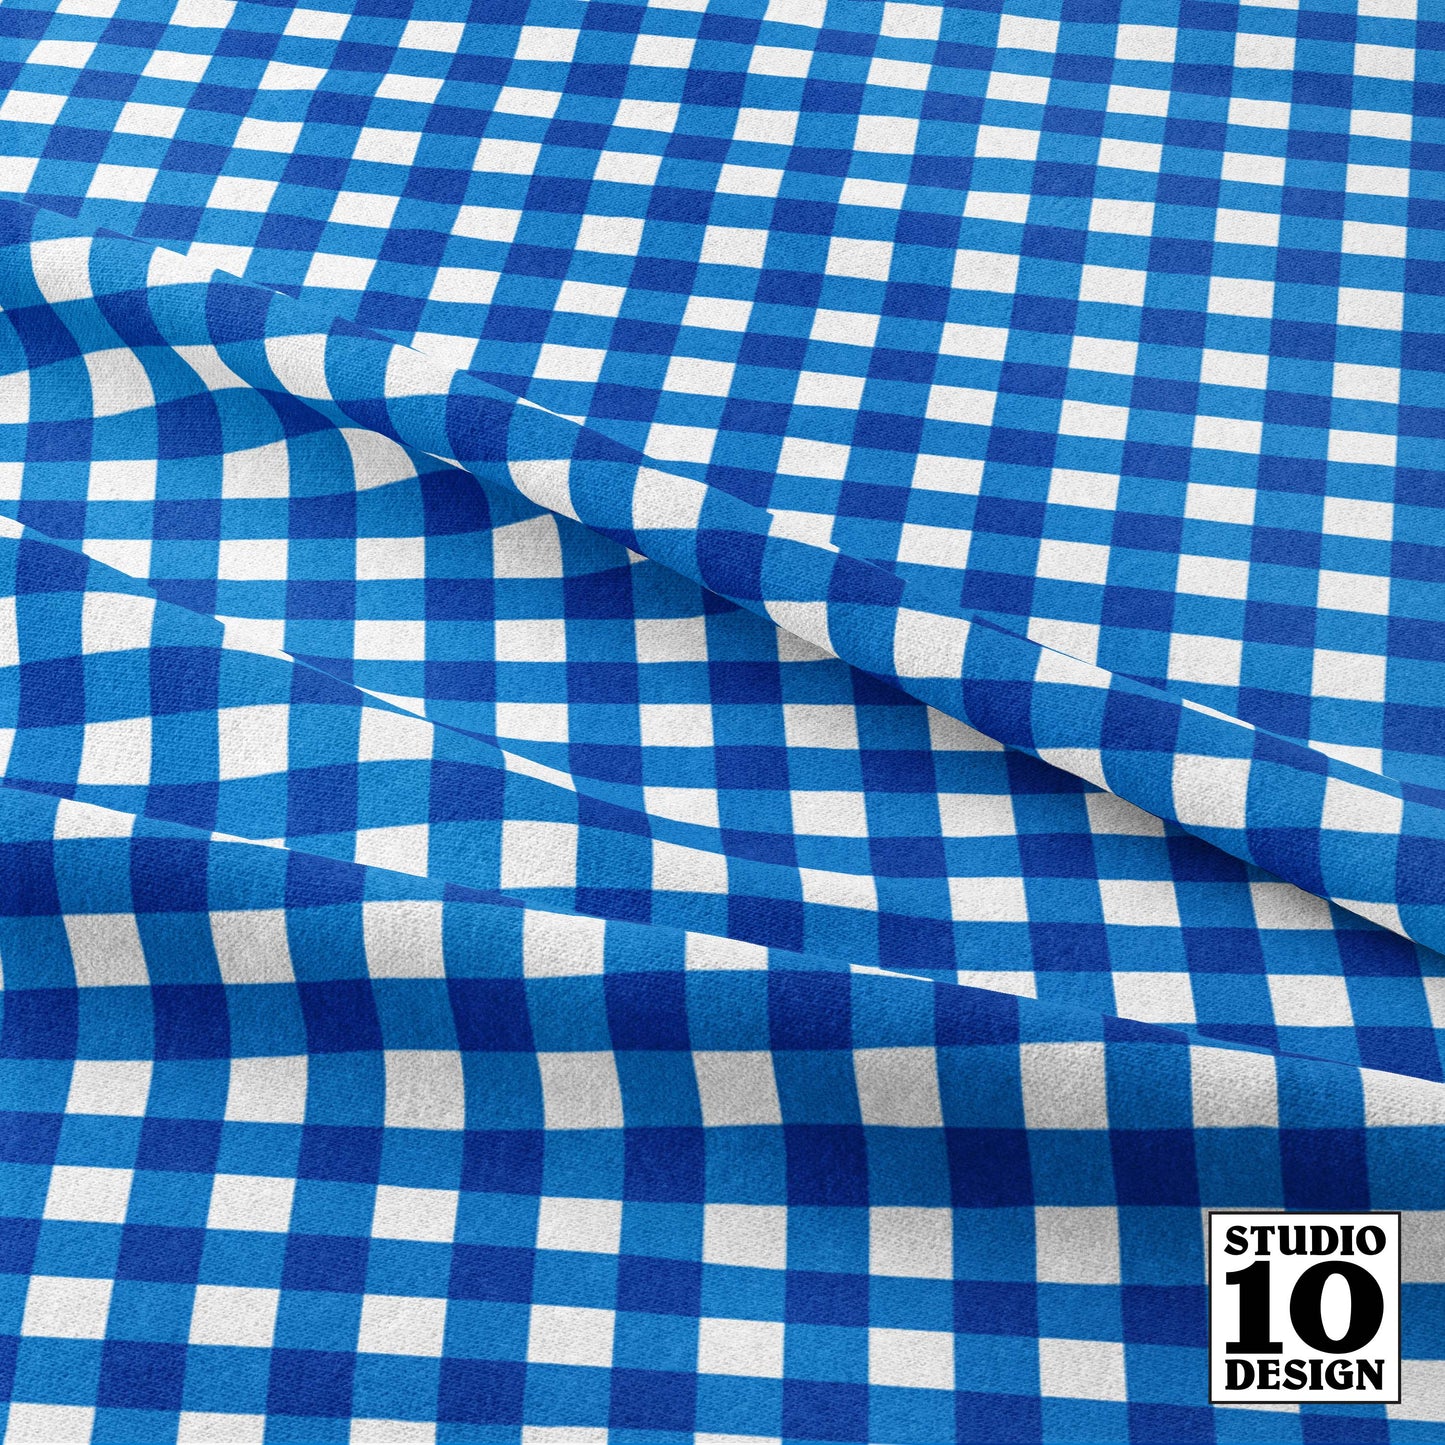 Gingham Style Bluebell Small Straight Printed Fabric by Studio Ten Design